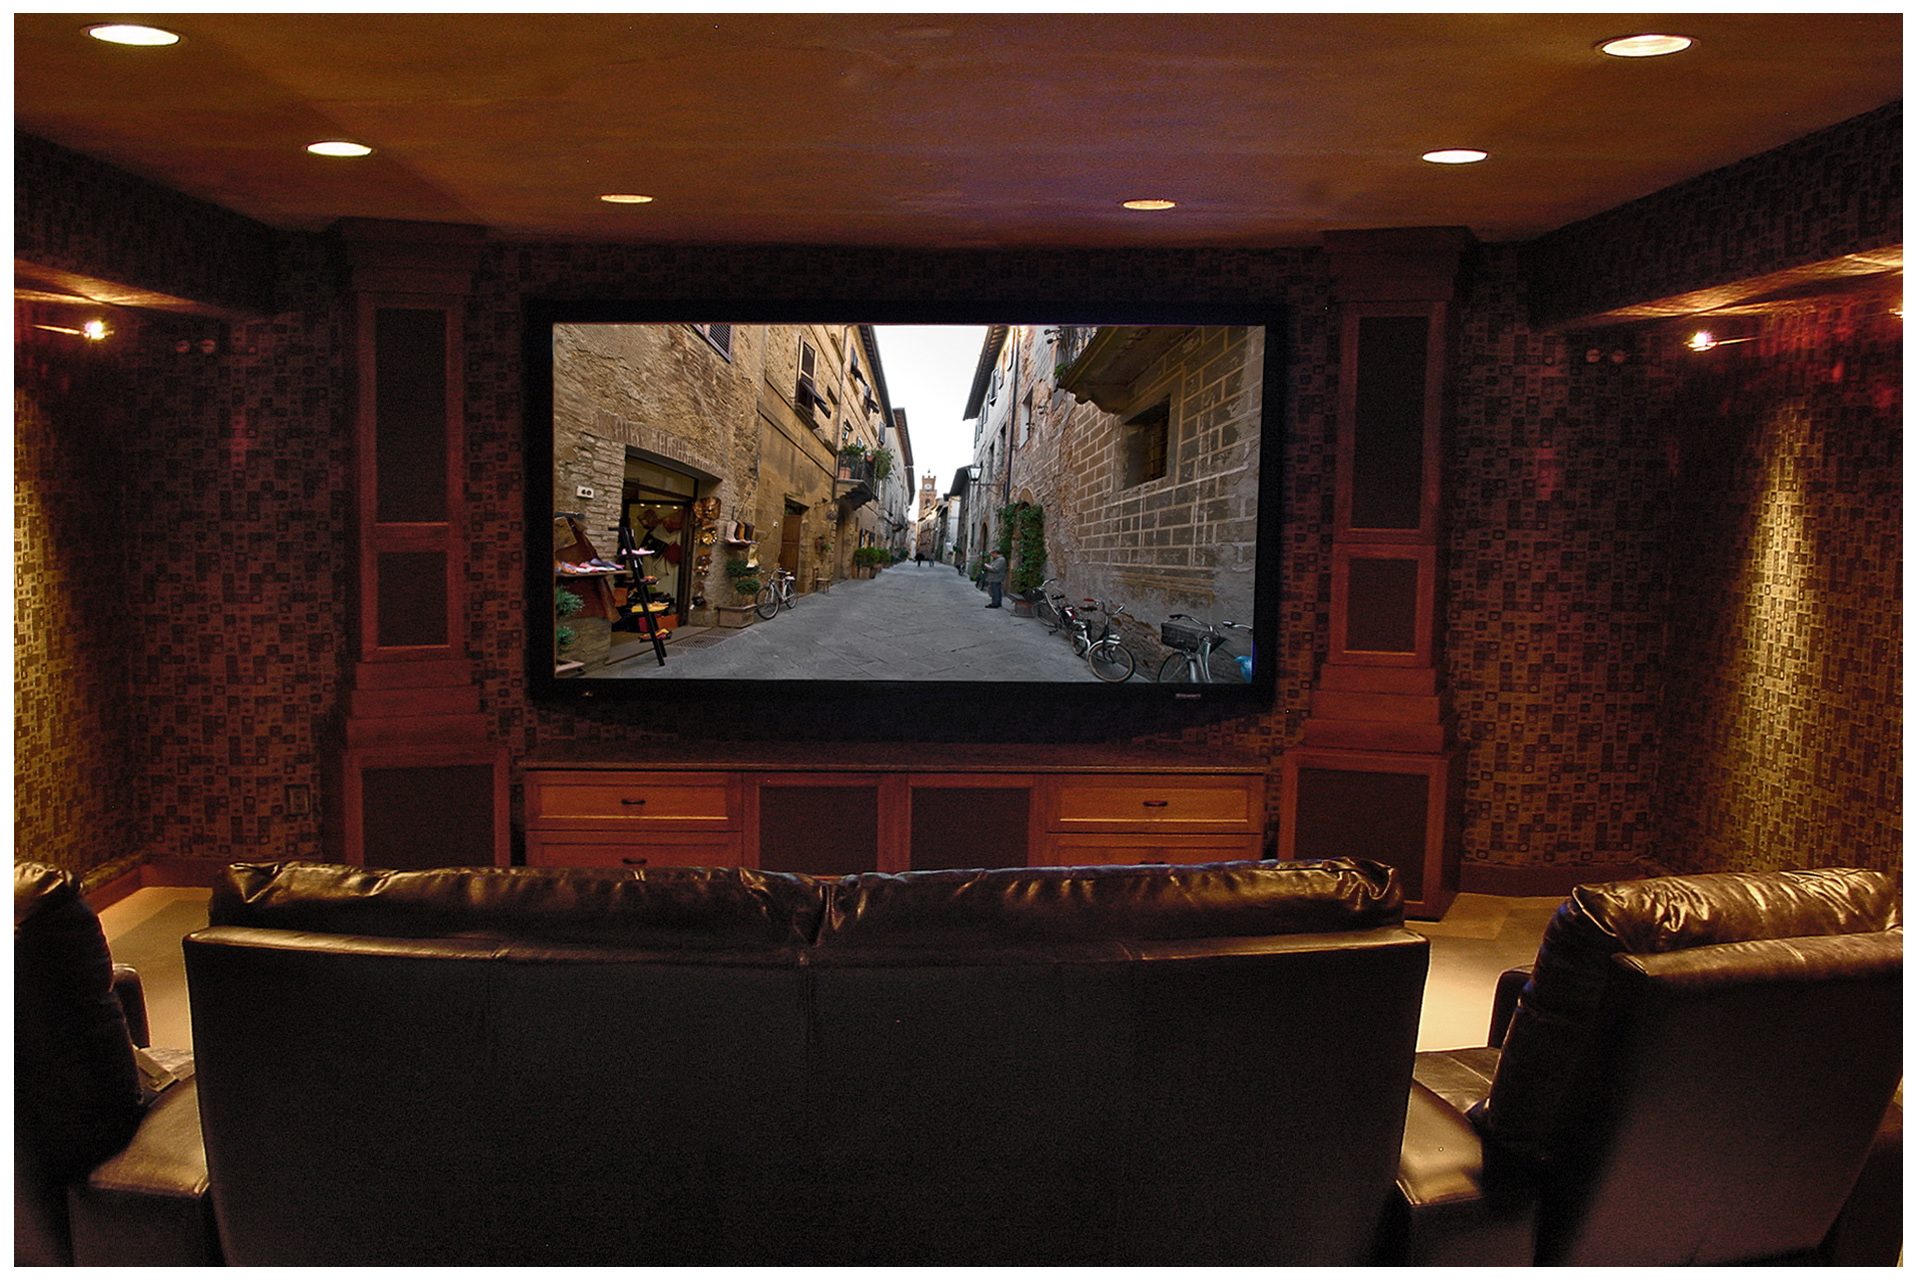 SMALL THEATER IN A DEDICATED ROOMCabinet towers flanking the screen enclosed all front subwoofers and main speakers.  A fixed projector above & behind seating area remained fairly invisible; side speakers were recessed into concrete basement walls flanking the viewing area, and a second pair of in-ceiling surrounds was recessed behind the viewing area. All electronics were placed in a closet space in an adjacent room.